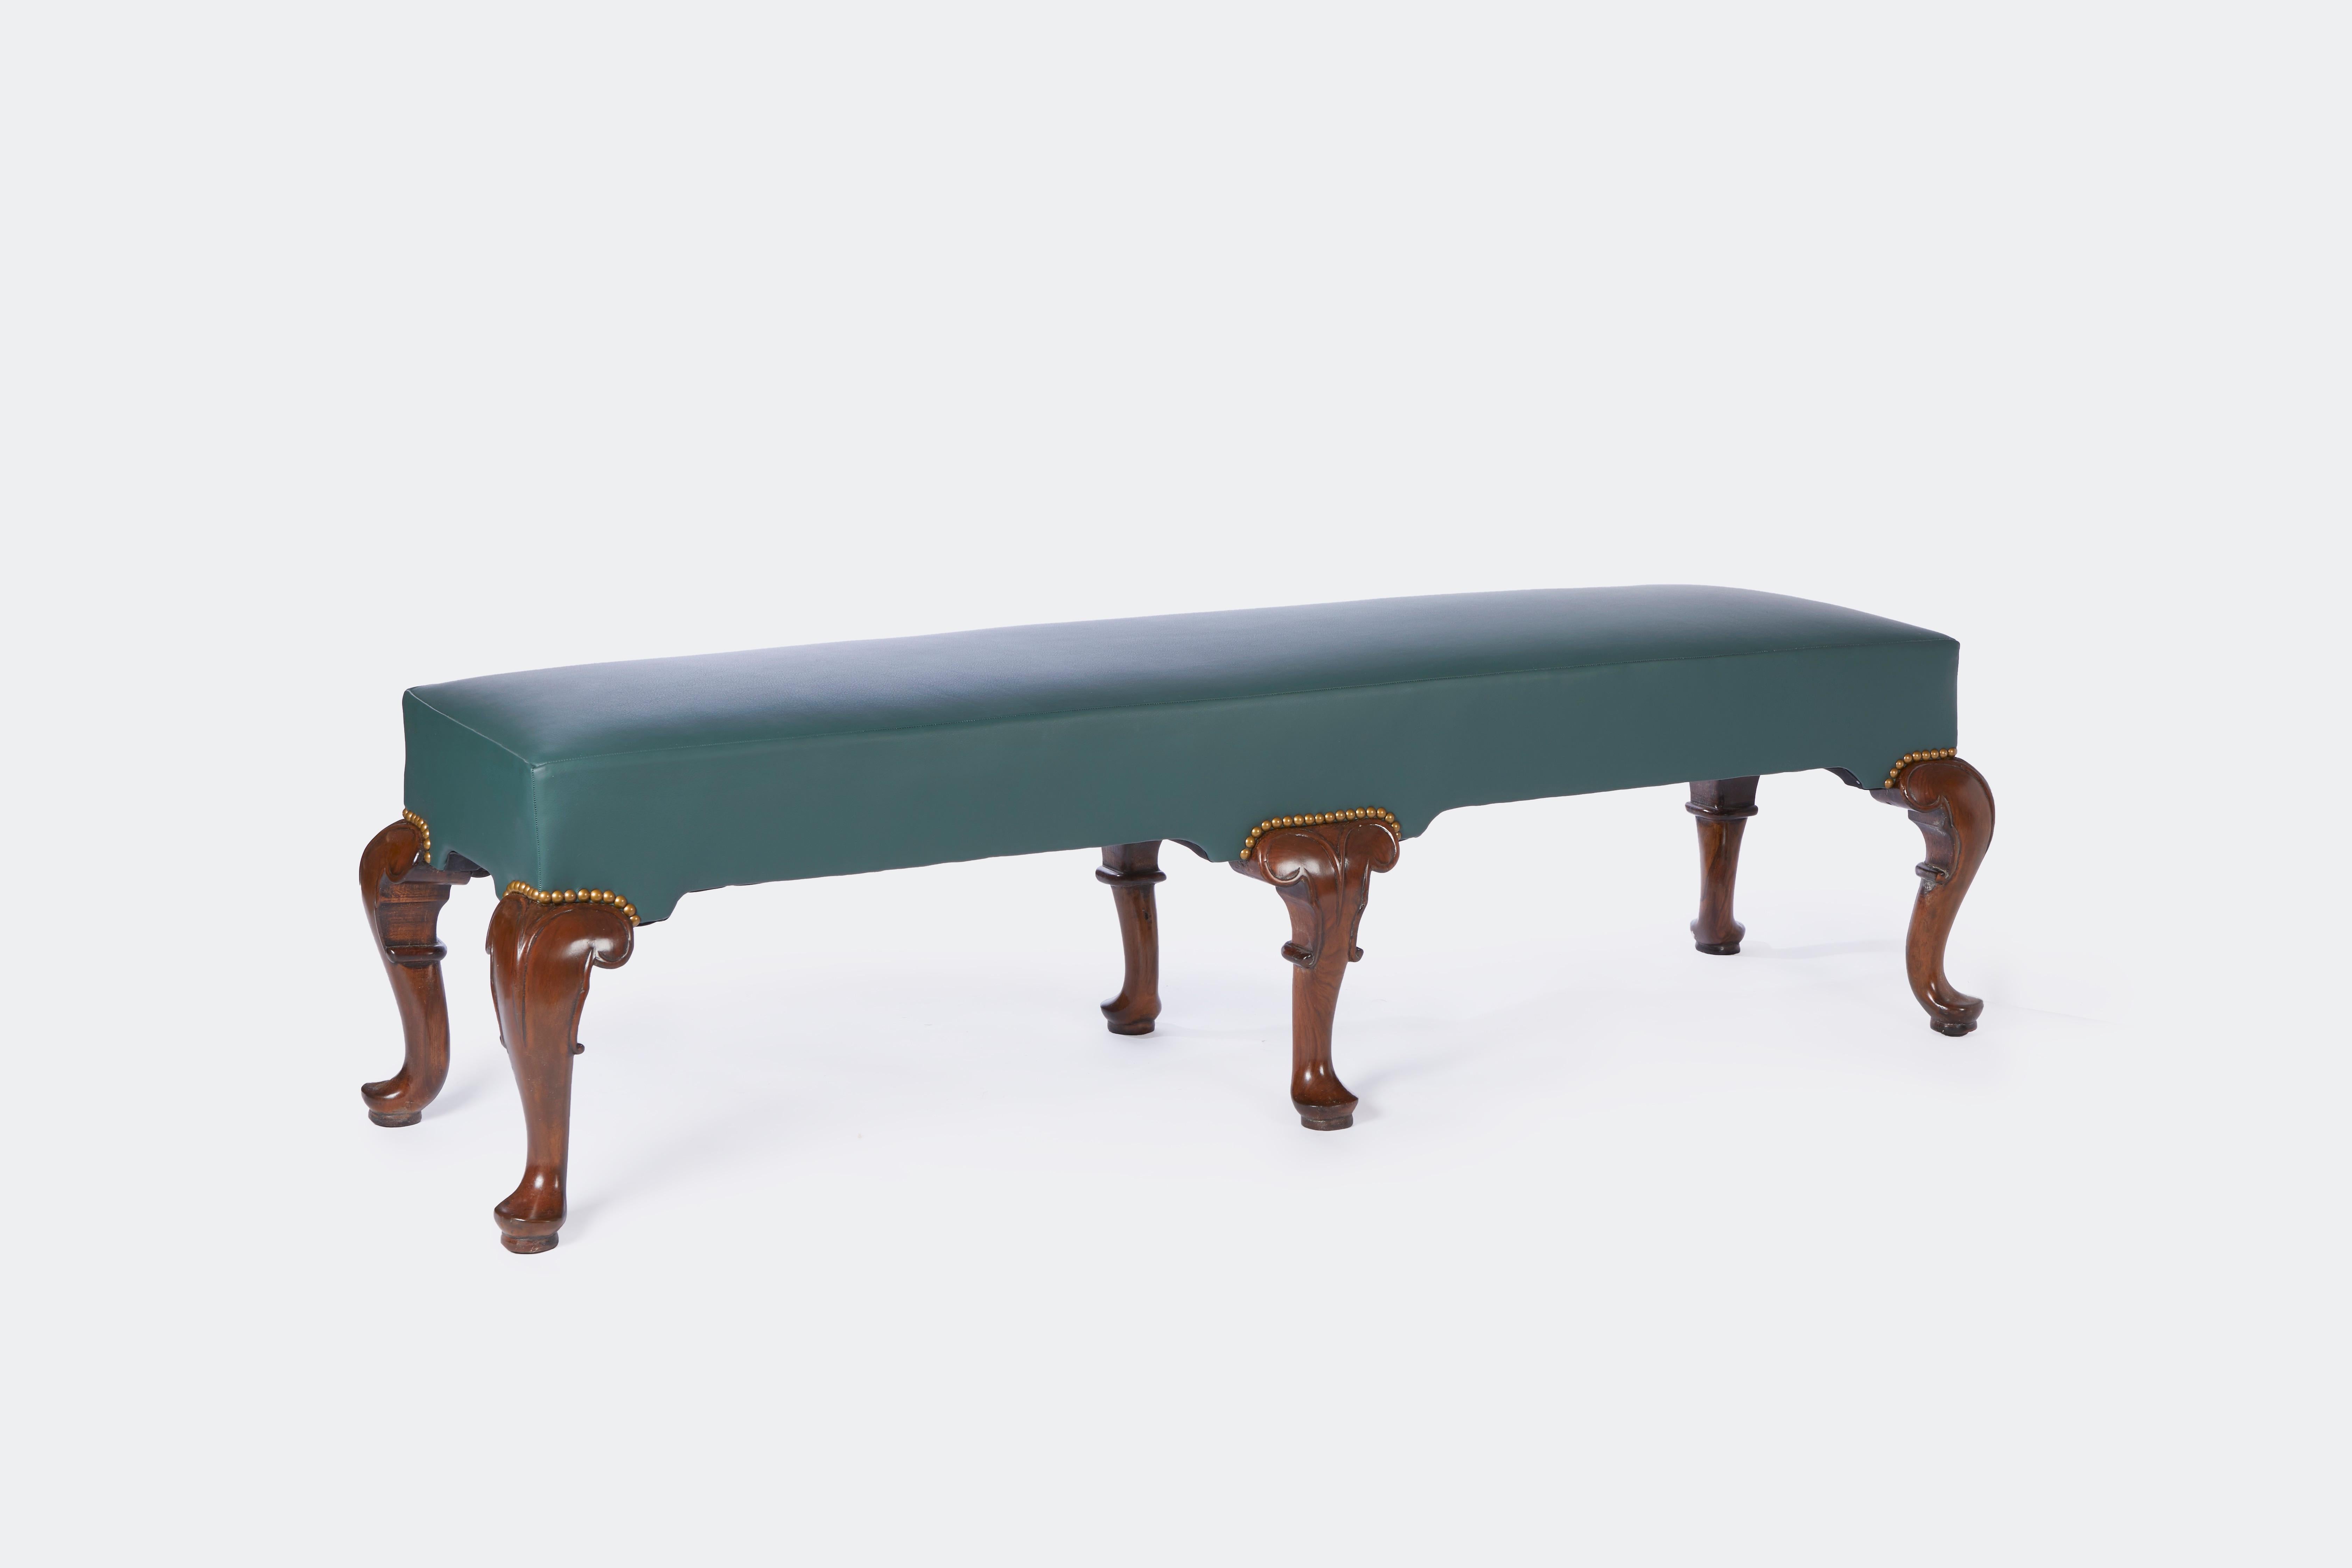 English George II style long bench with 6 hand-carved cabriole form legs terminating in pad feet shaped apron finished on four sides and having nail head trim detail bench circa 1870.
Provenance: A Perish-Hadley interior Henryck de Kwiatkowski.